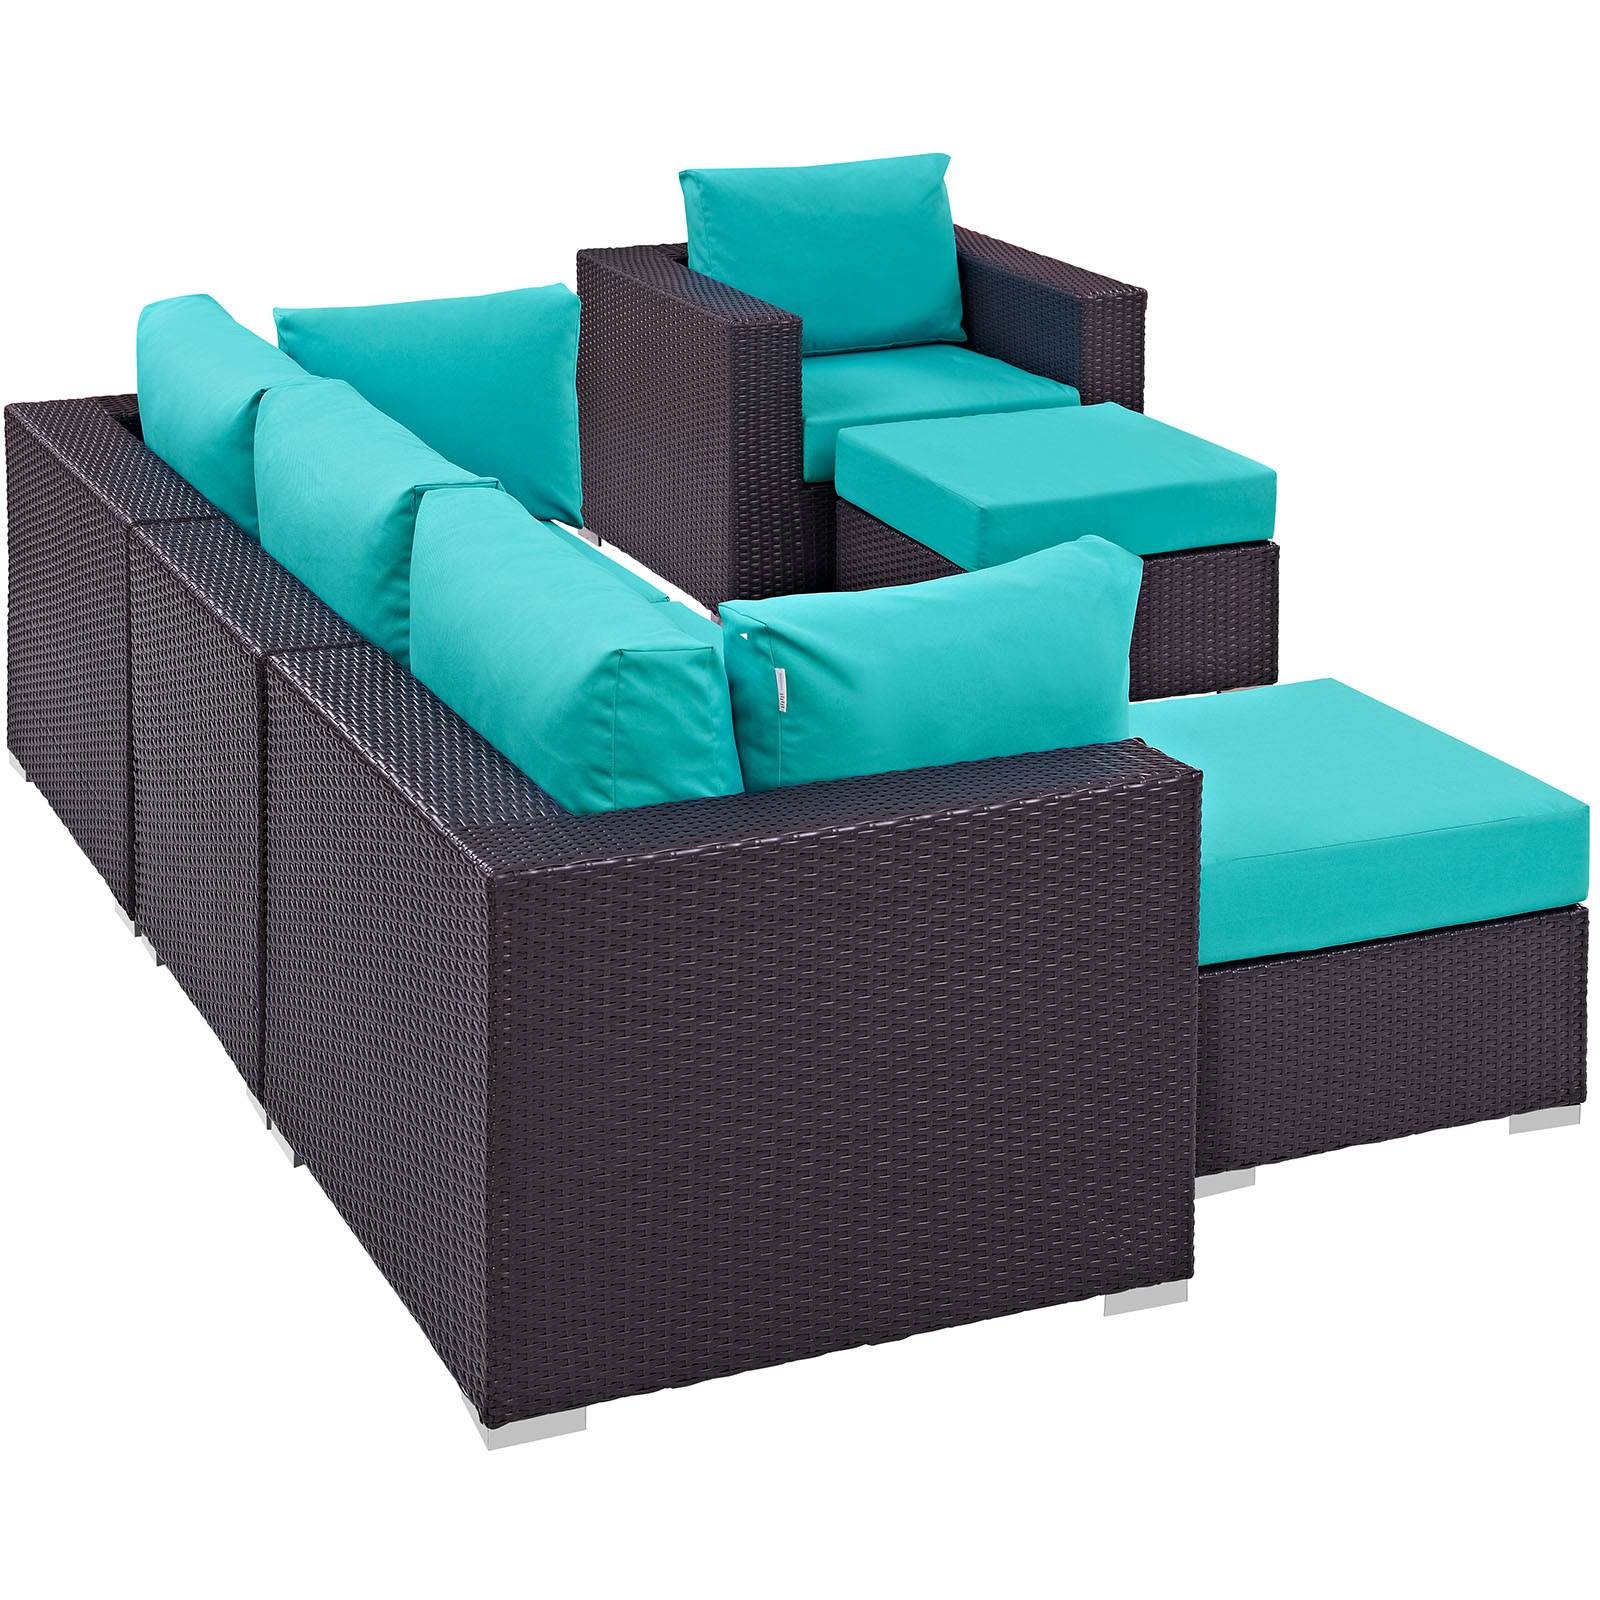 Modway Convene 6 Piece Outdoor Patio Sectional Set in Espresso Turquoise - image 3 of 8